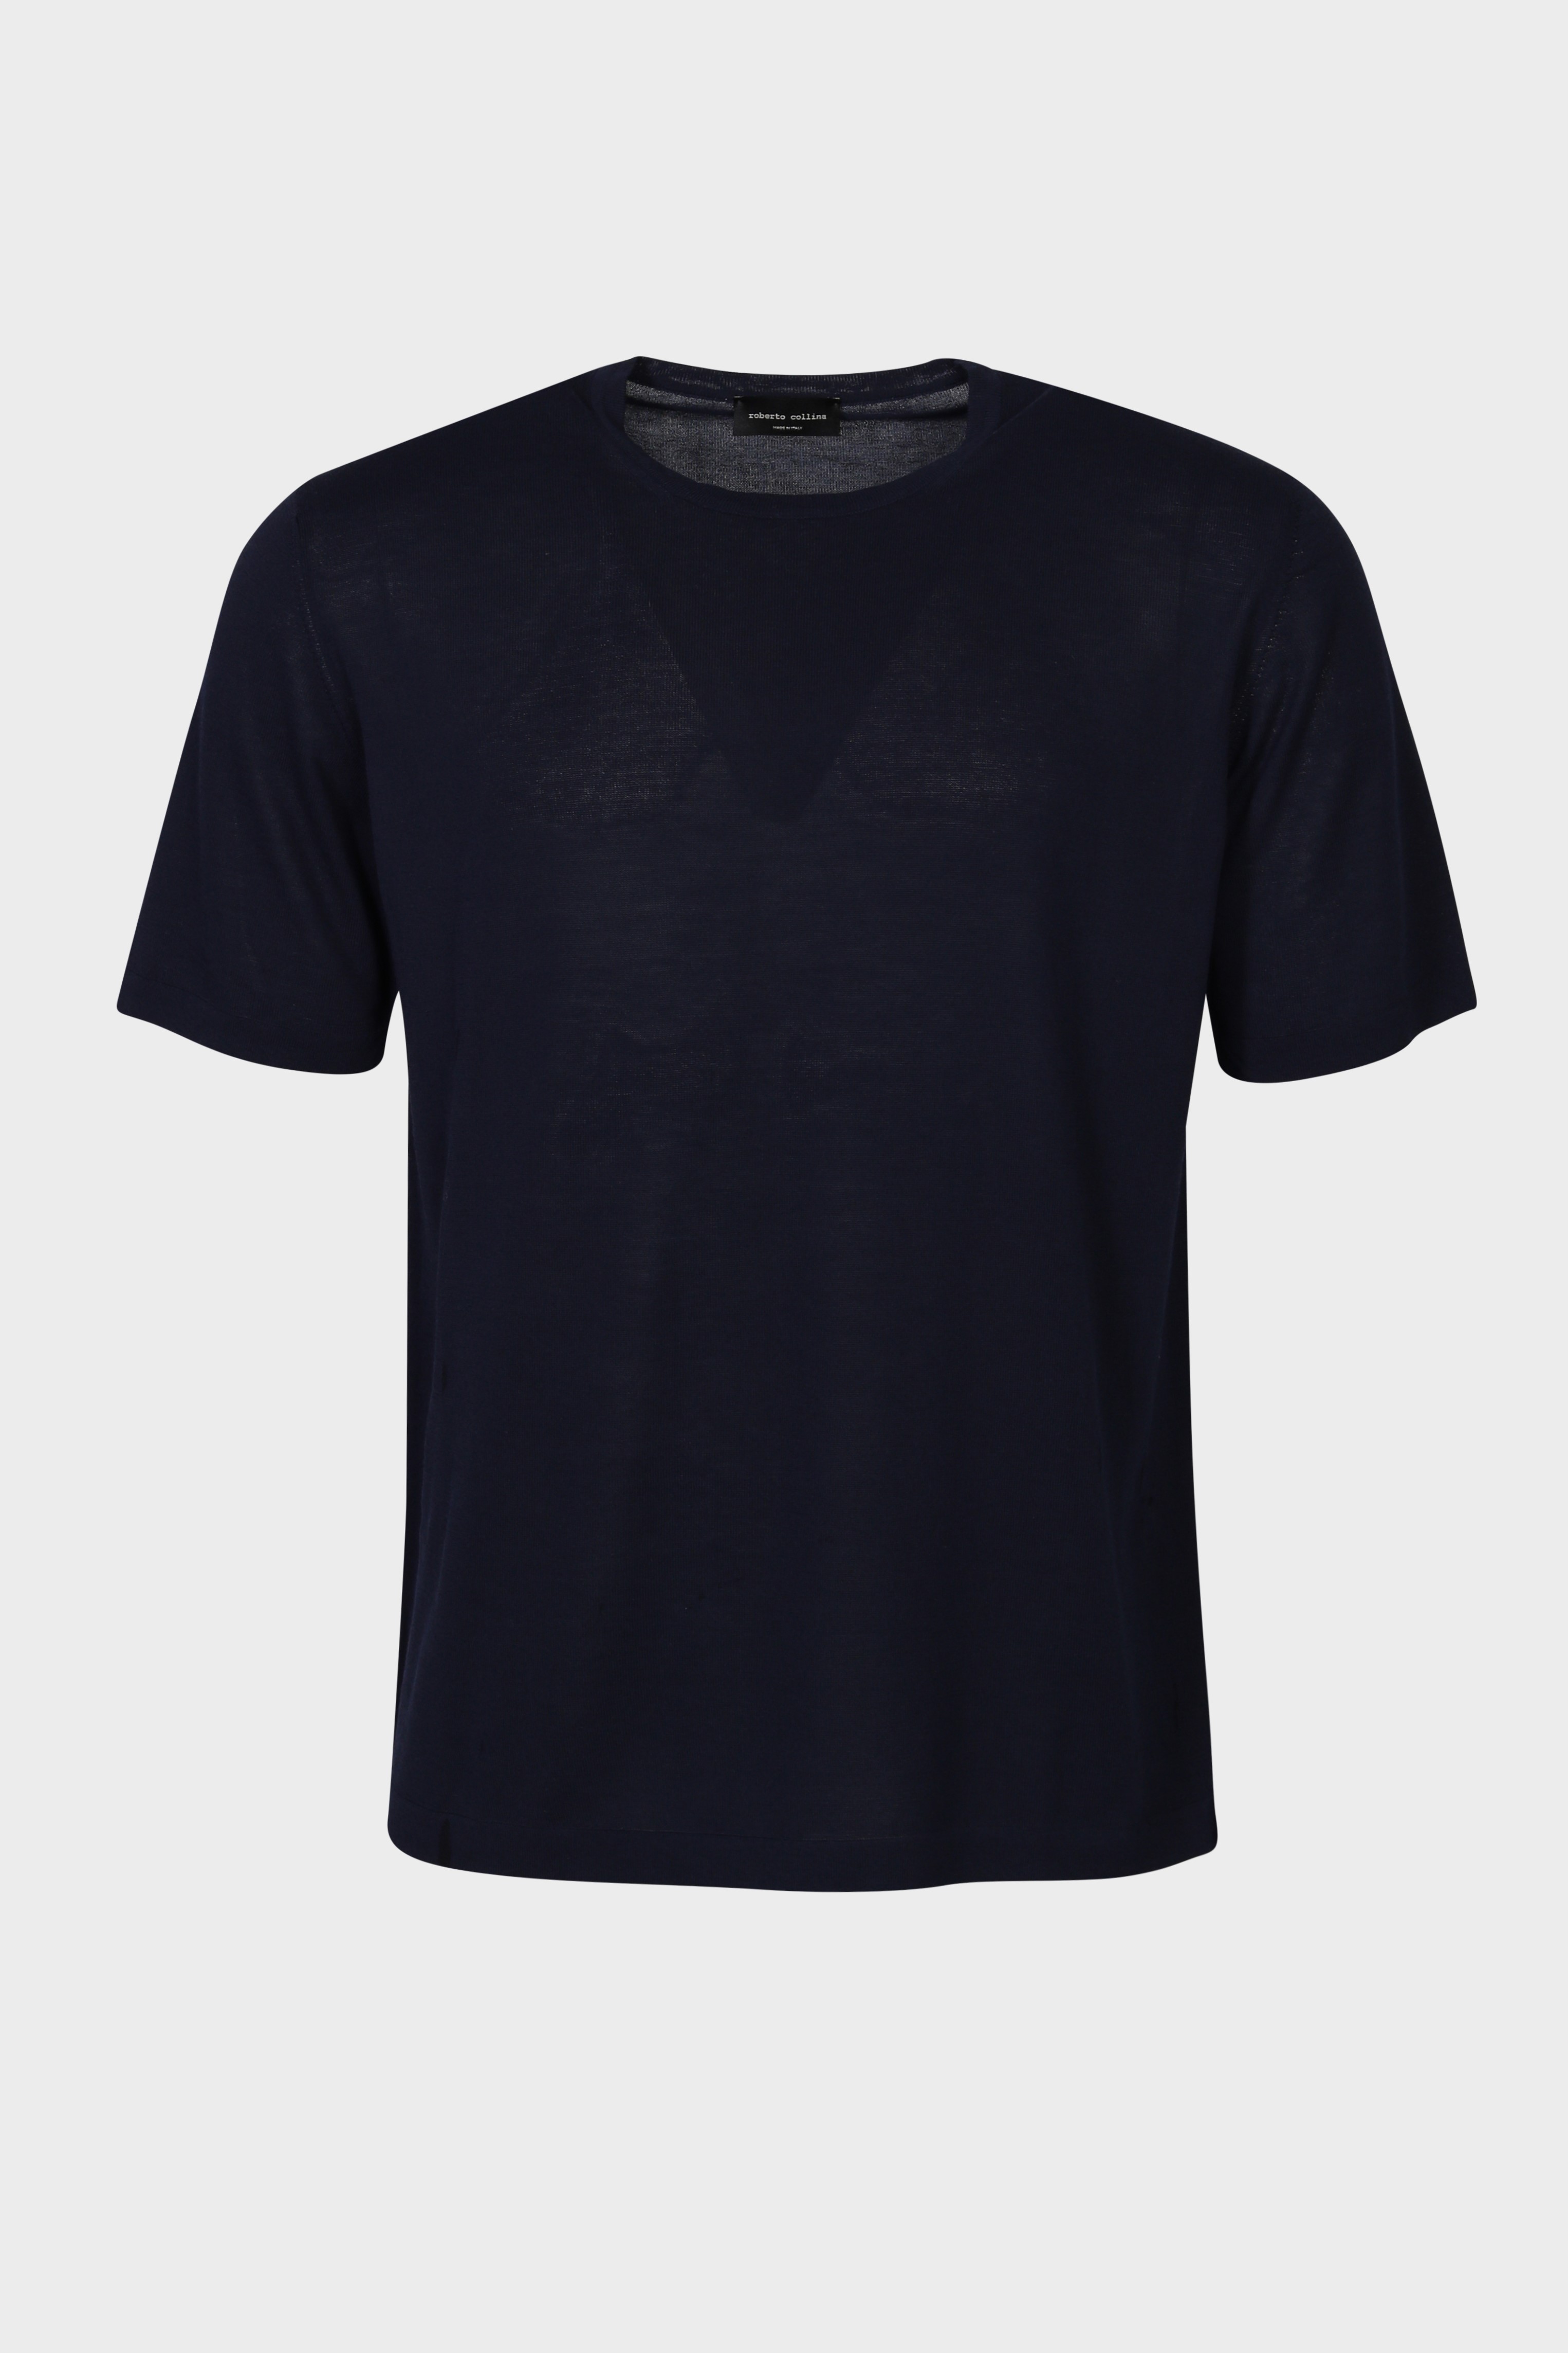 ROBERTO COLLINA Cotton Knit T-Shirt in Navy 50